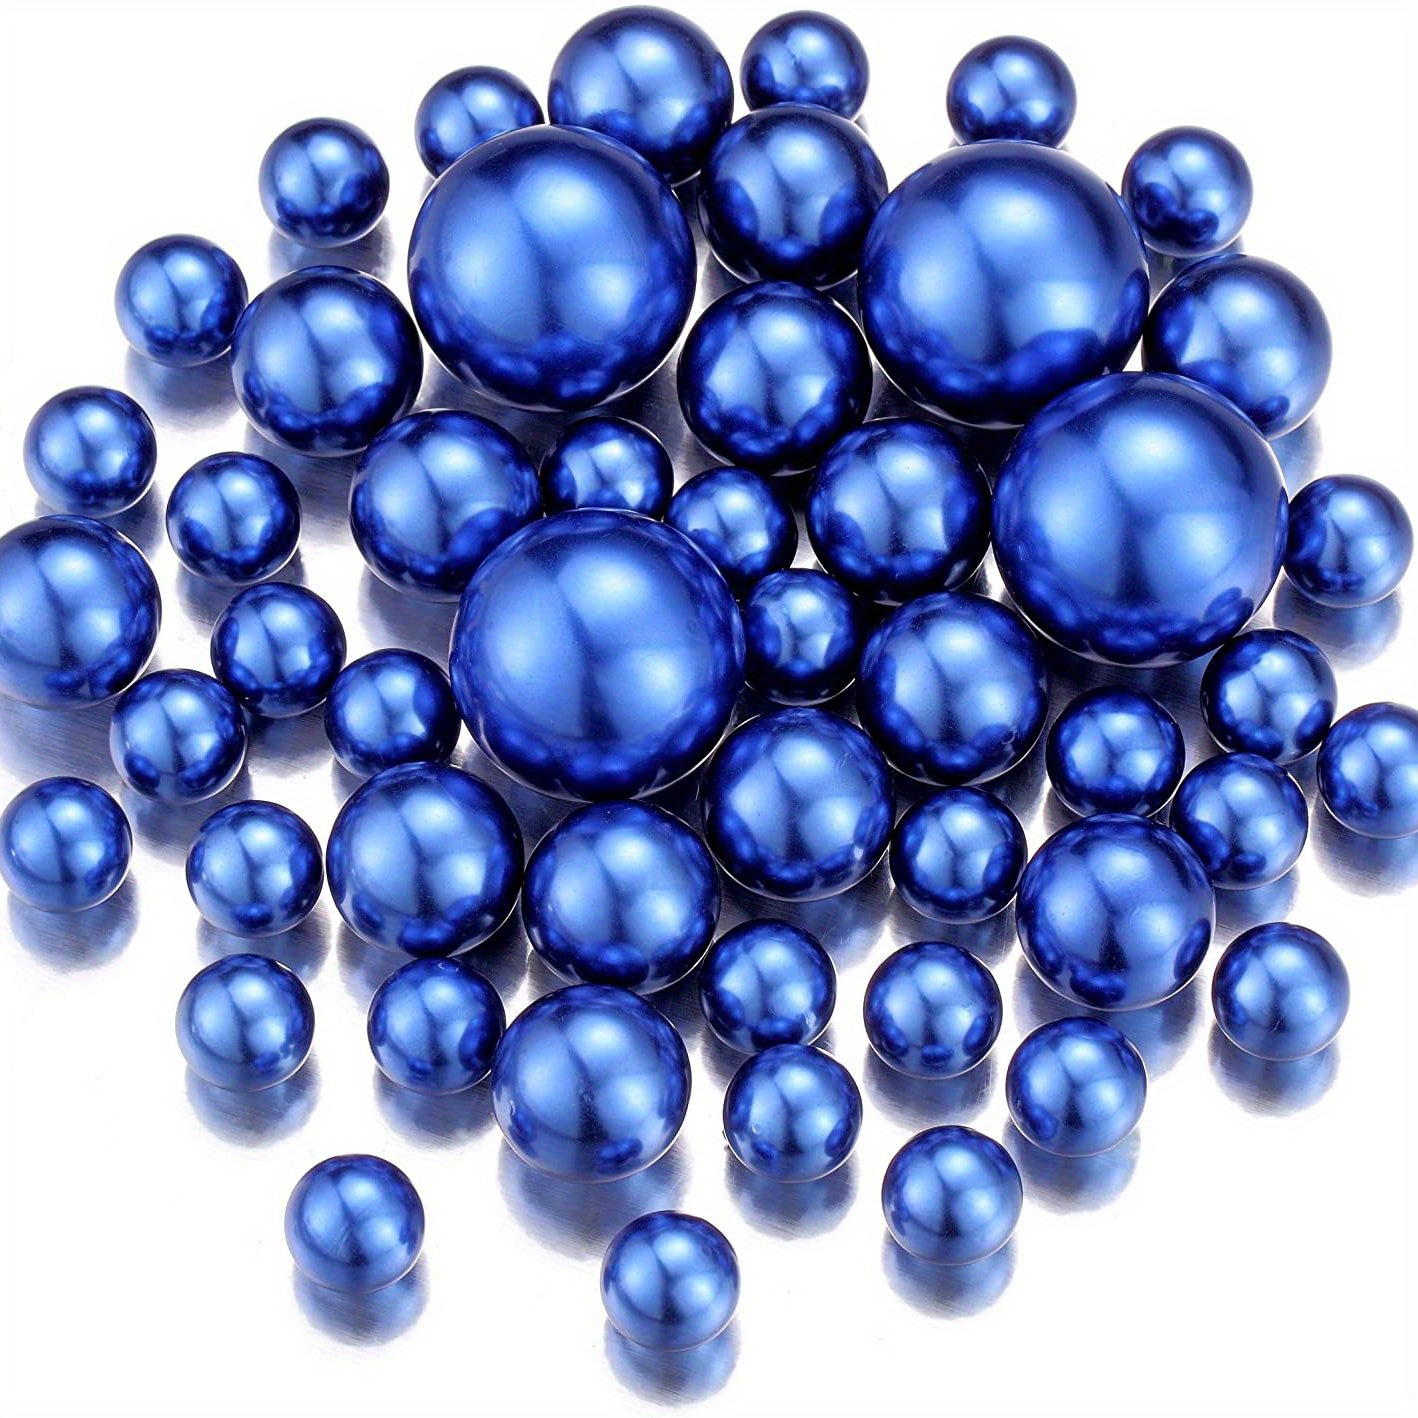 Niziky 500PCS 6mm Crafts No Hole Pearls, White/Blue Loose Pearls Beads  Without Holes, Round No Hole Pearls Vase Fillers, Pearls for Crafts,  Wedding